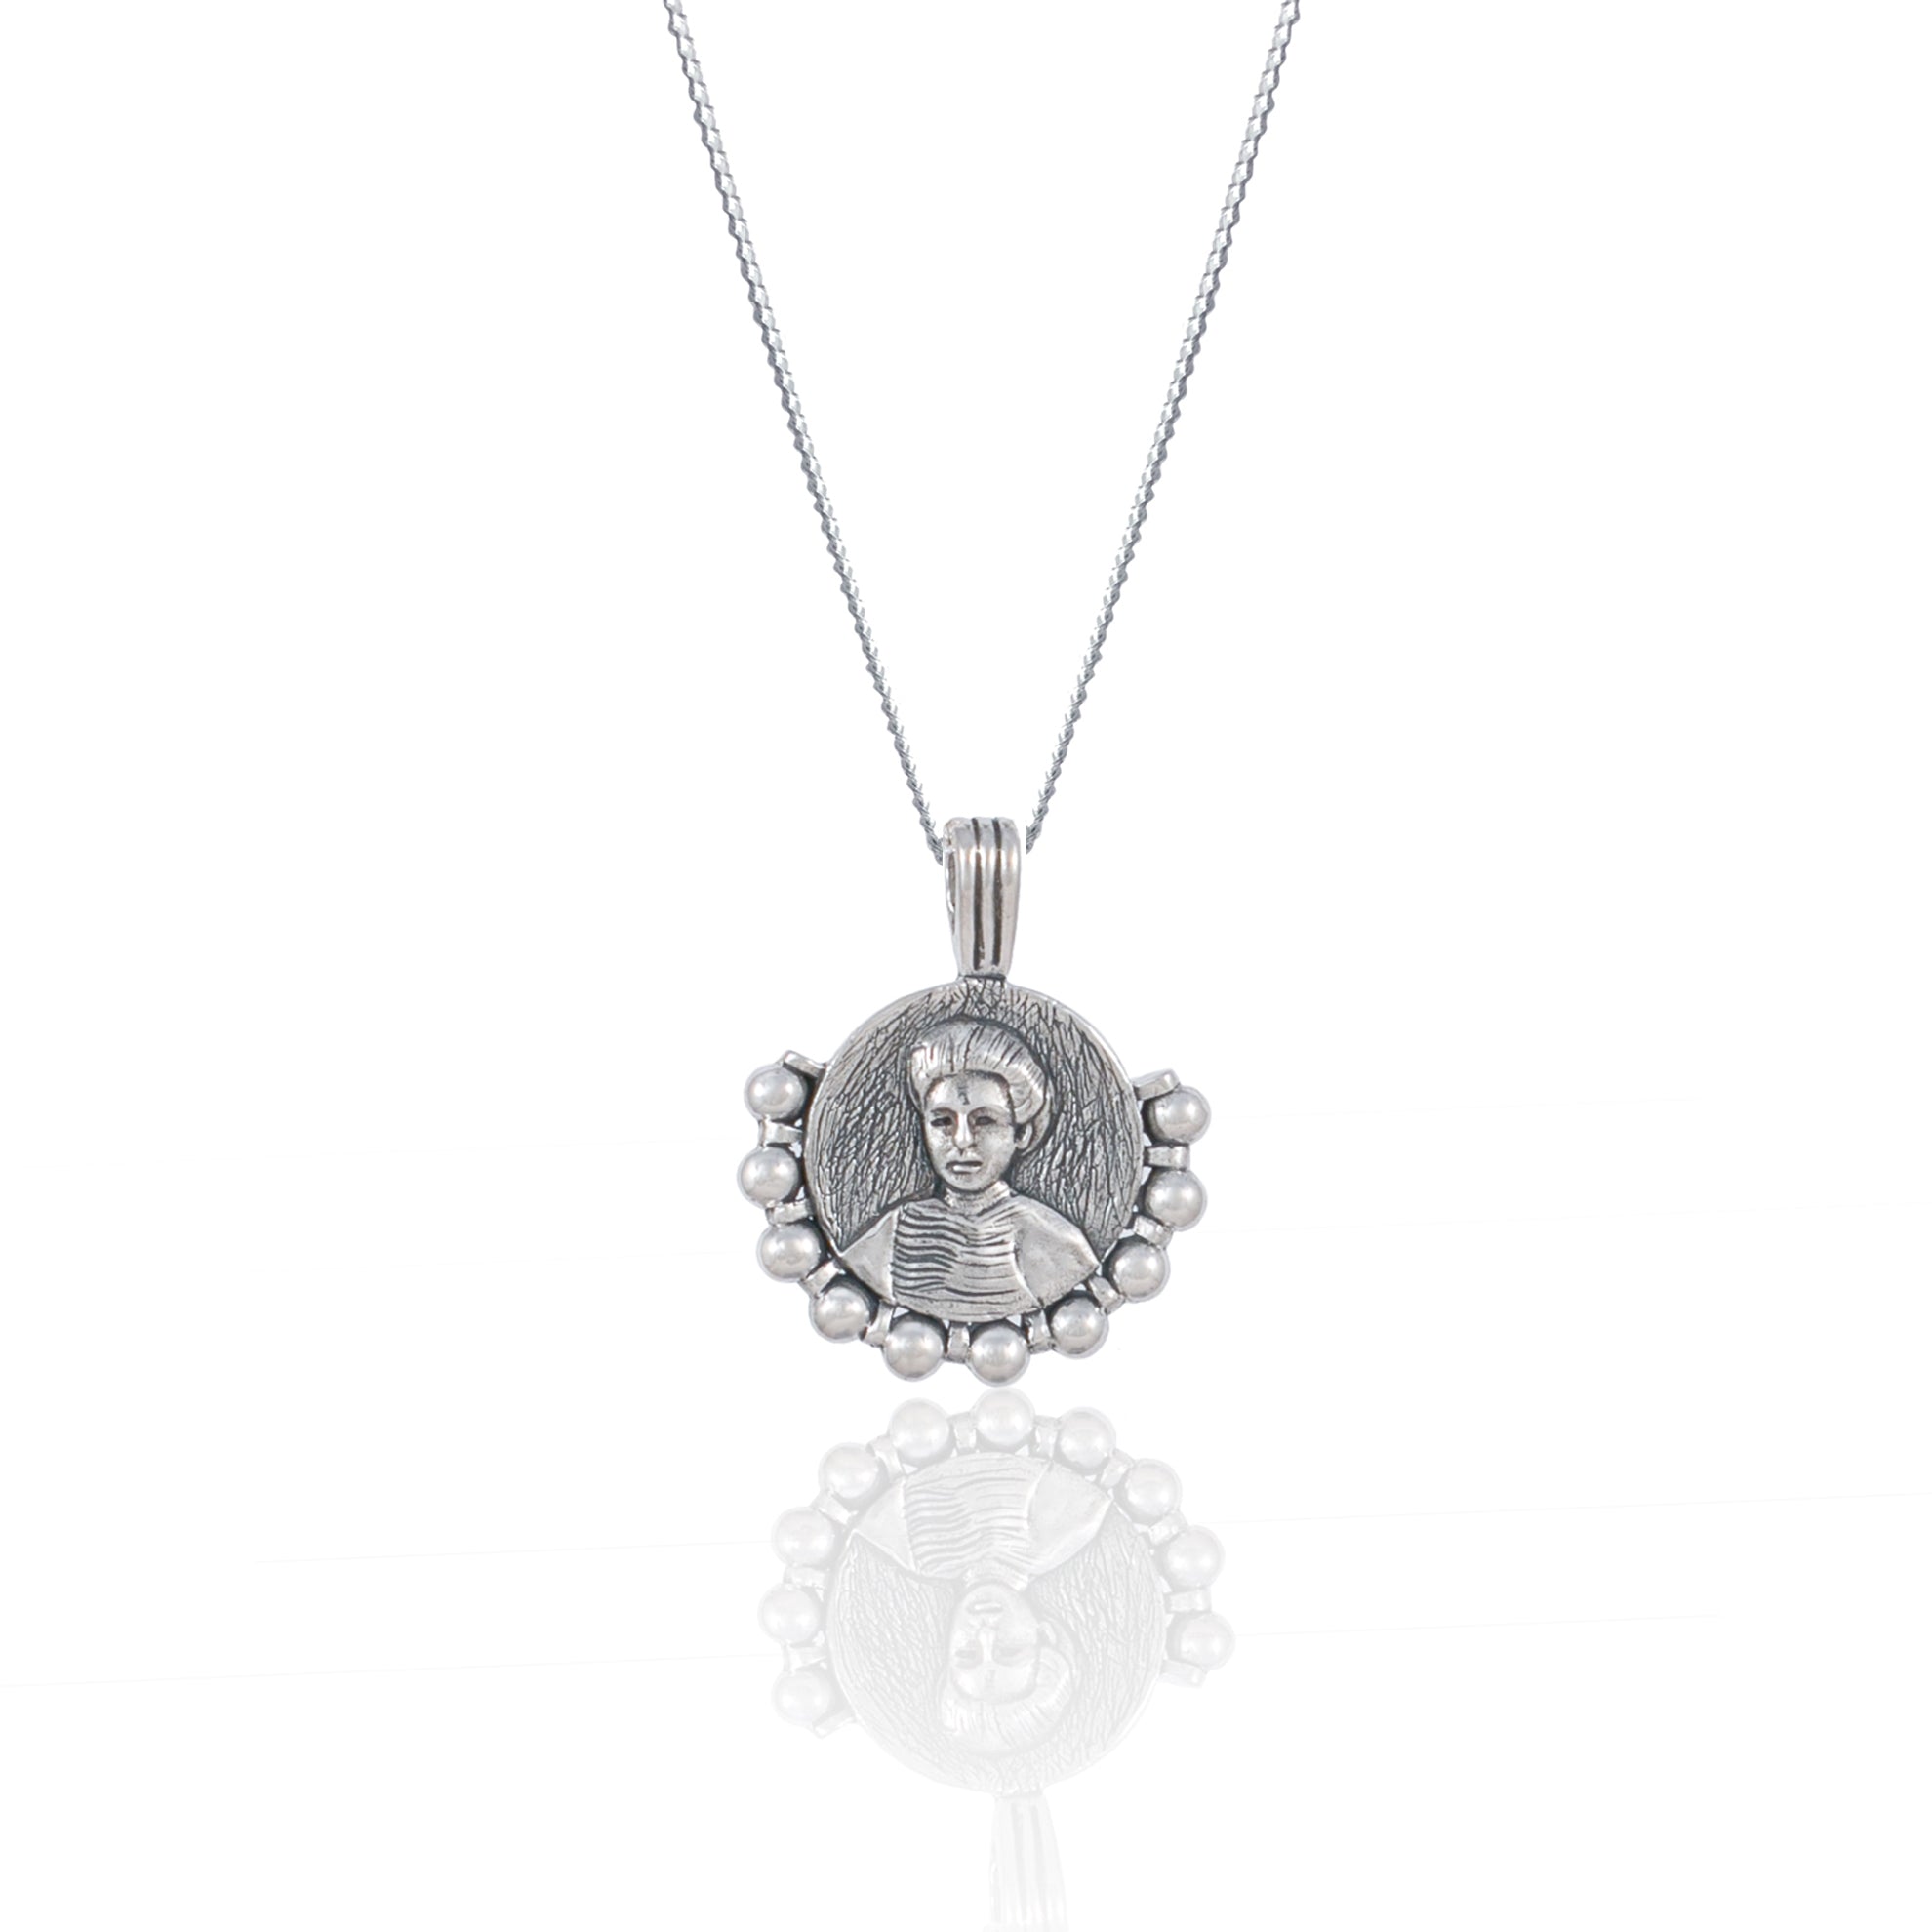 Kate Shepherd Pendant for Independence Necklace - Silver